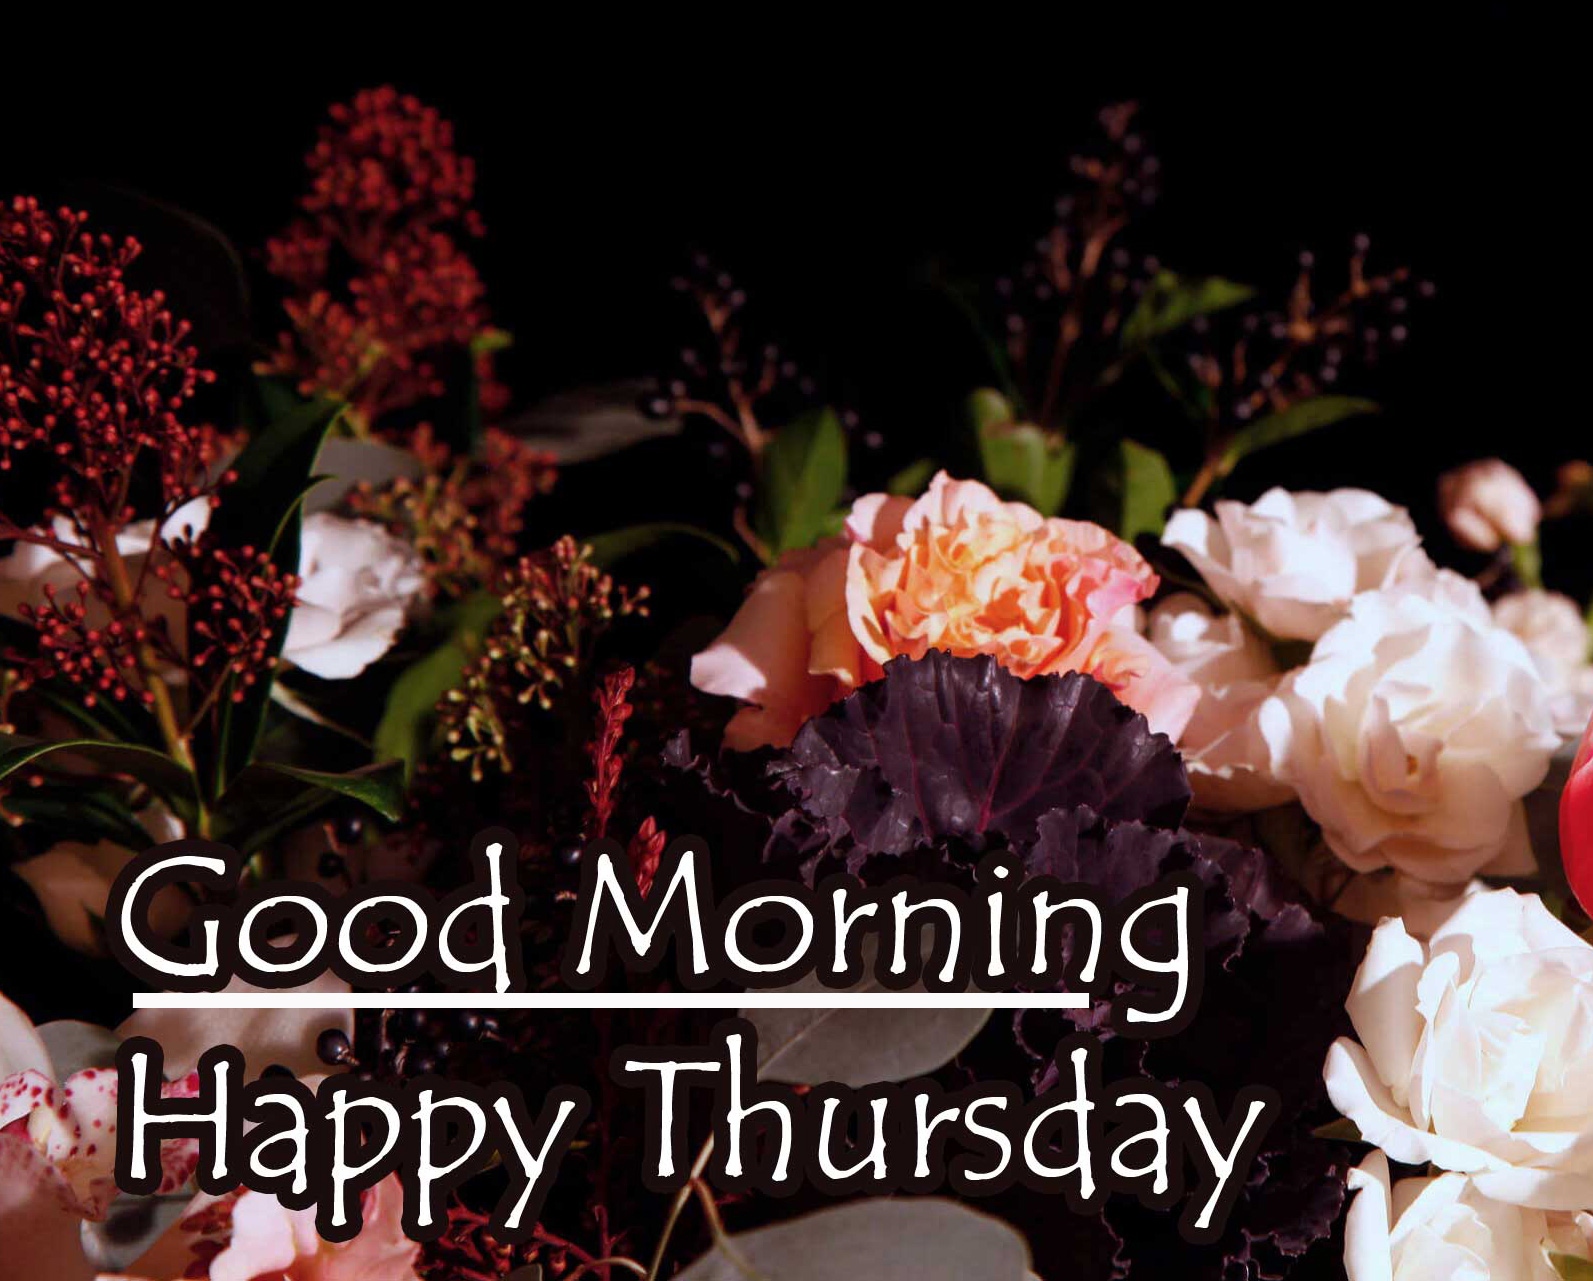 Good Morning Thursday Images Pics Download Free 